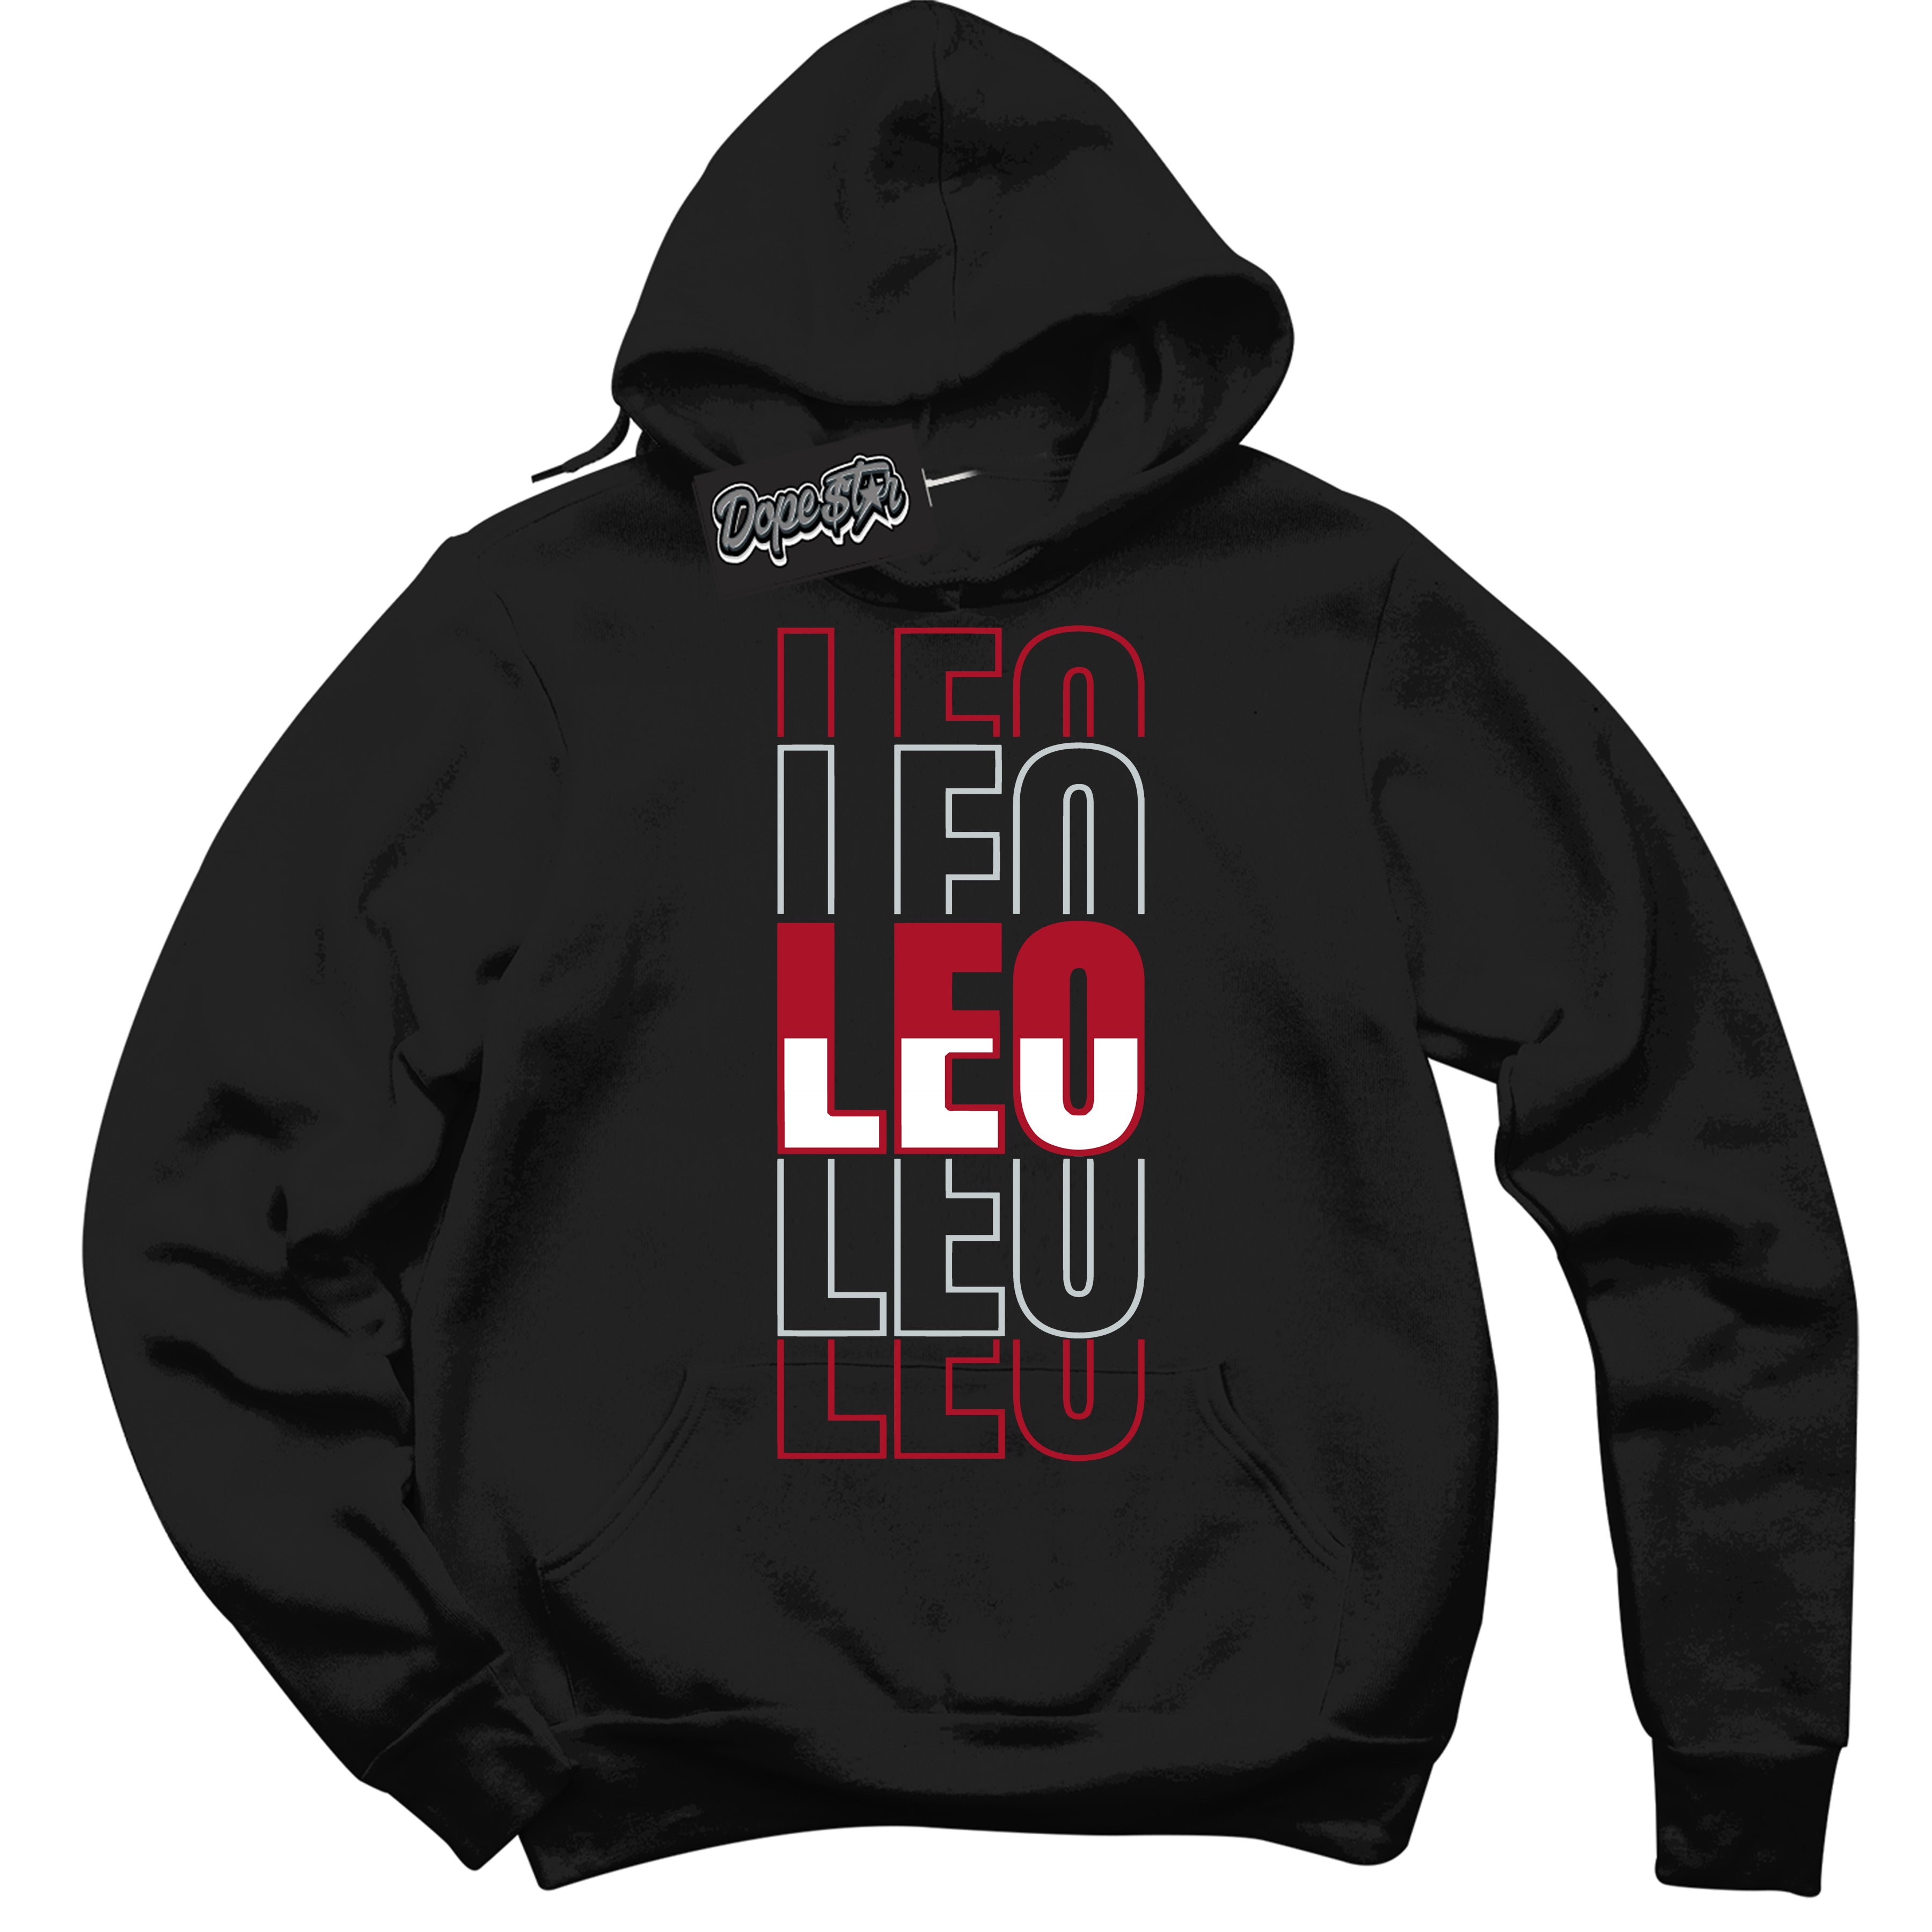 Cool Black Hoodie with “ Leo ”  design that Perfectly Matches  Reverse Ultraman Sneakers.